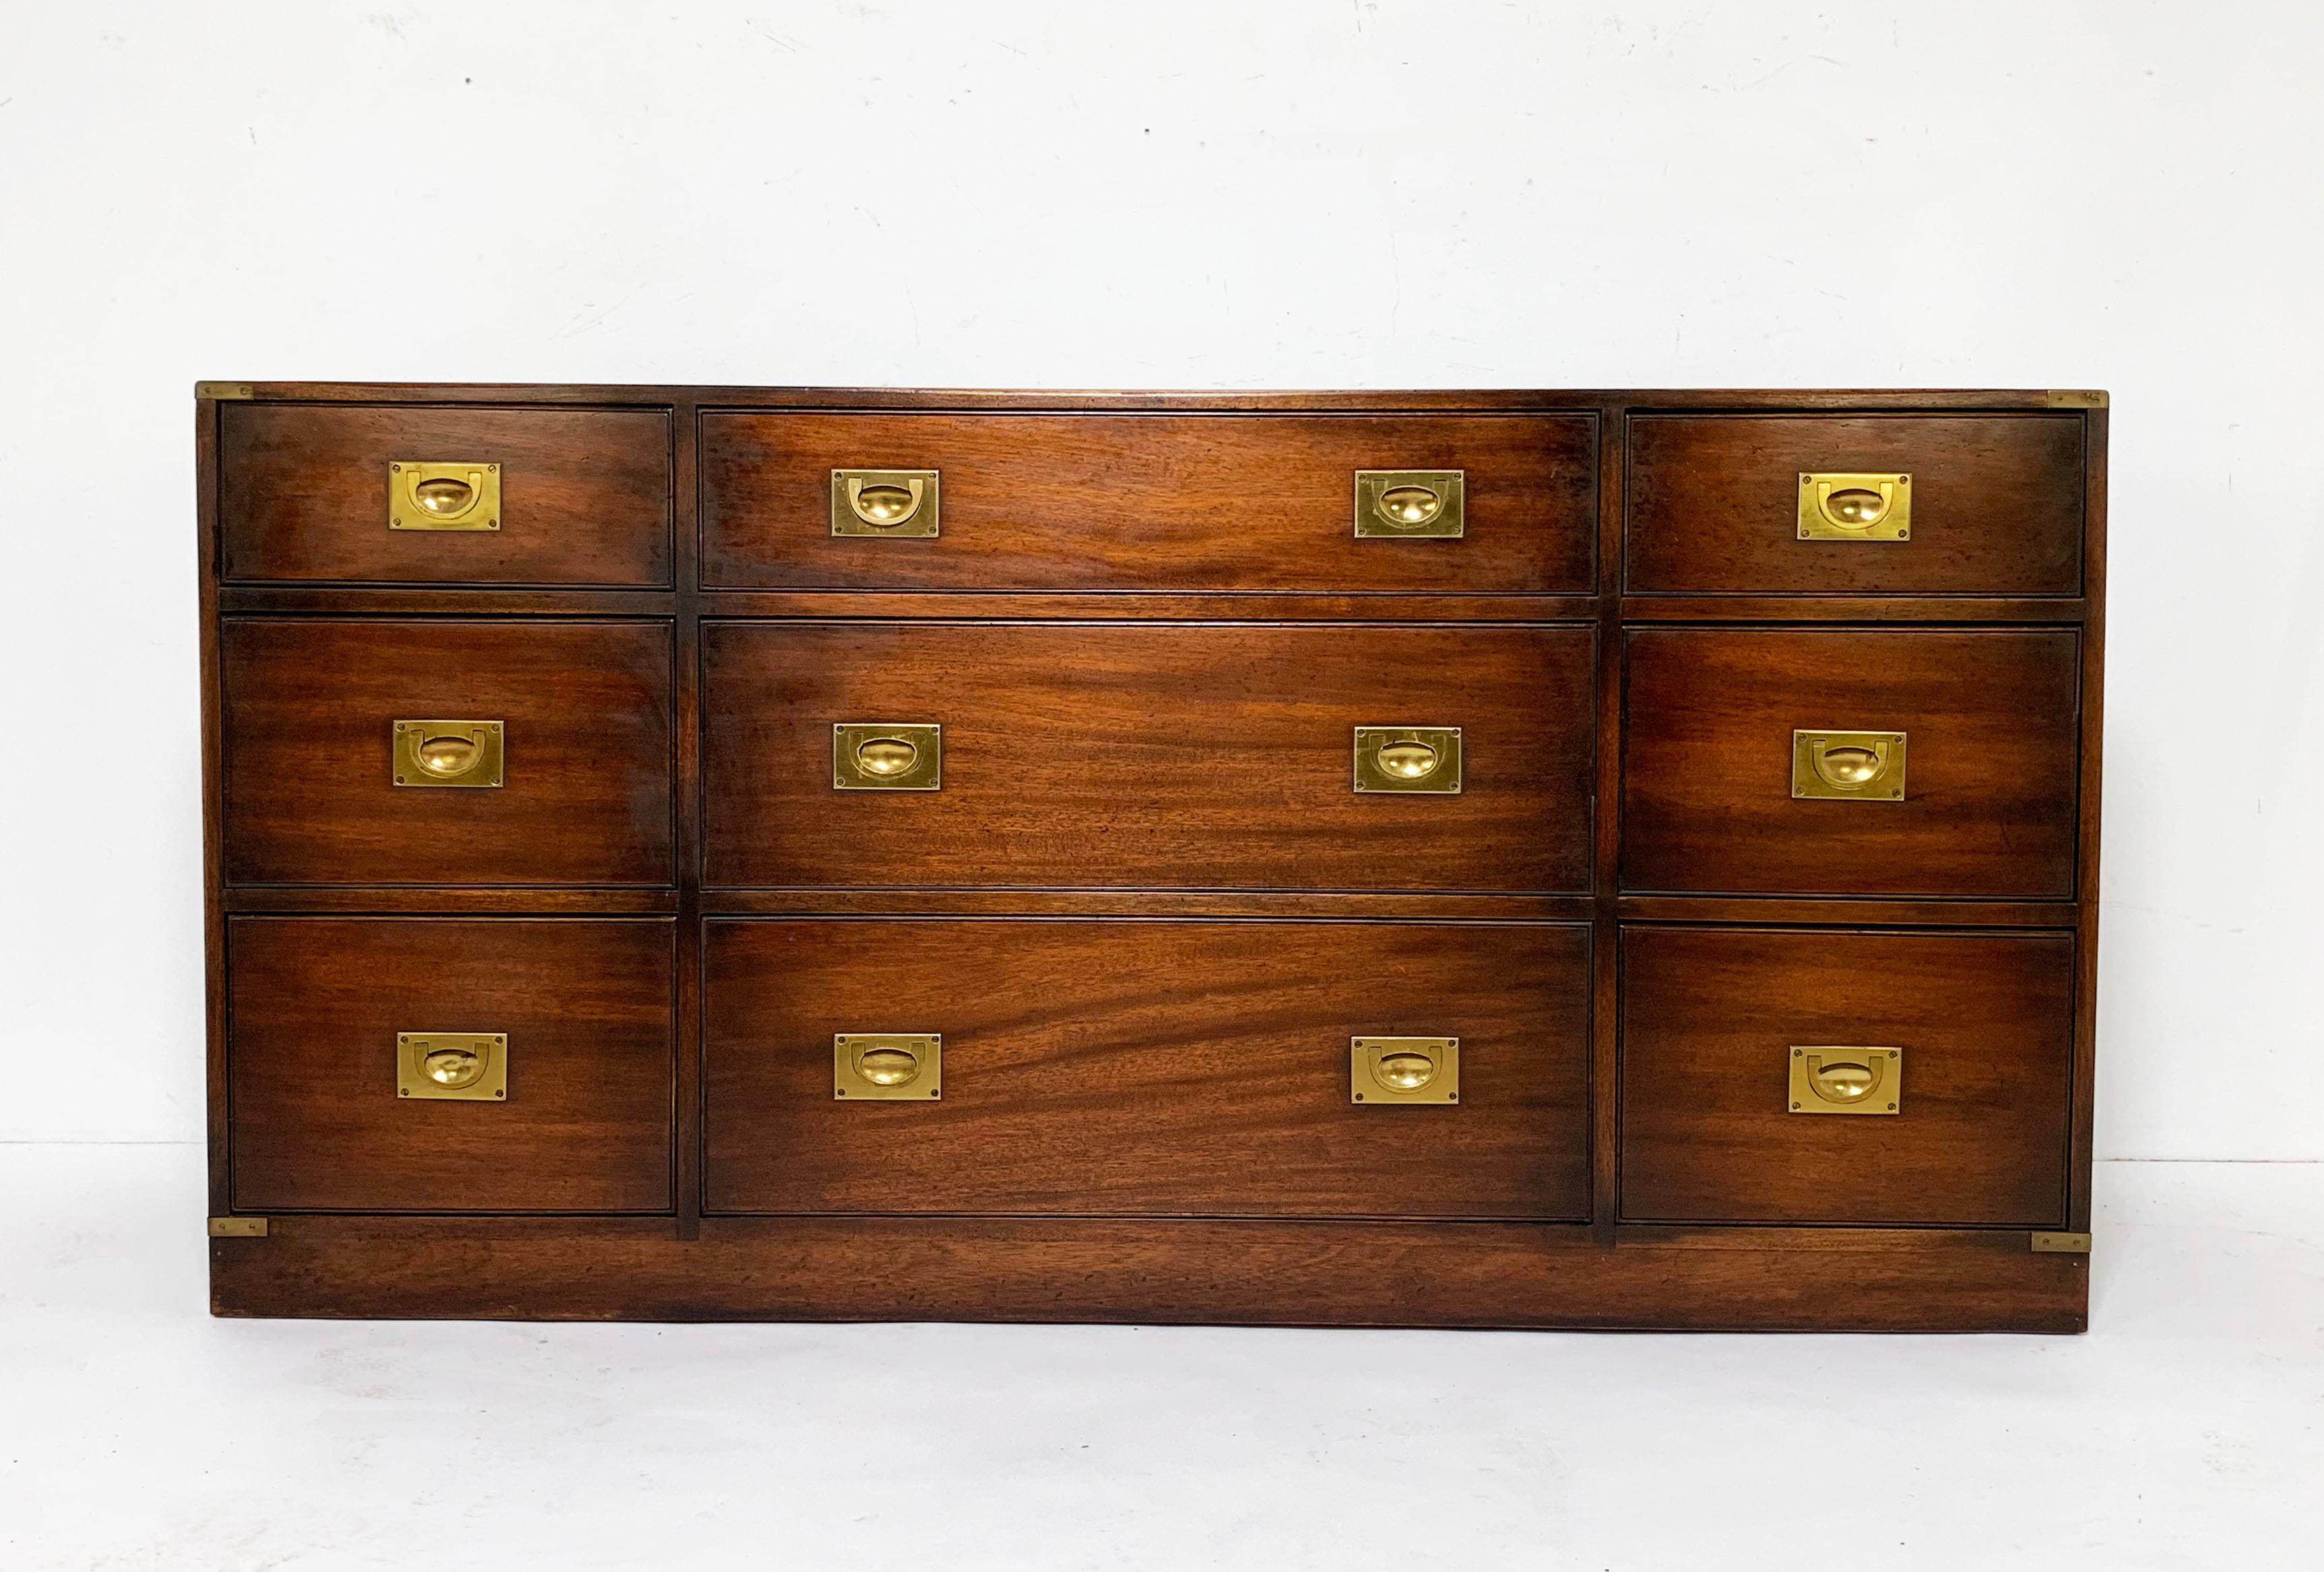 An authentic English made military Campaign chest of nine drawers by the Queen’s Awarded maker Bevan-Funnell. This midcentury made cabinet is constructed of solid mahogany and brass throughout, with exposed finger joints and with an officer’s